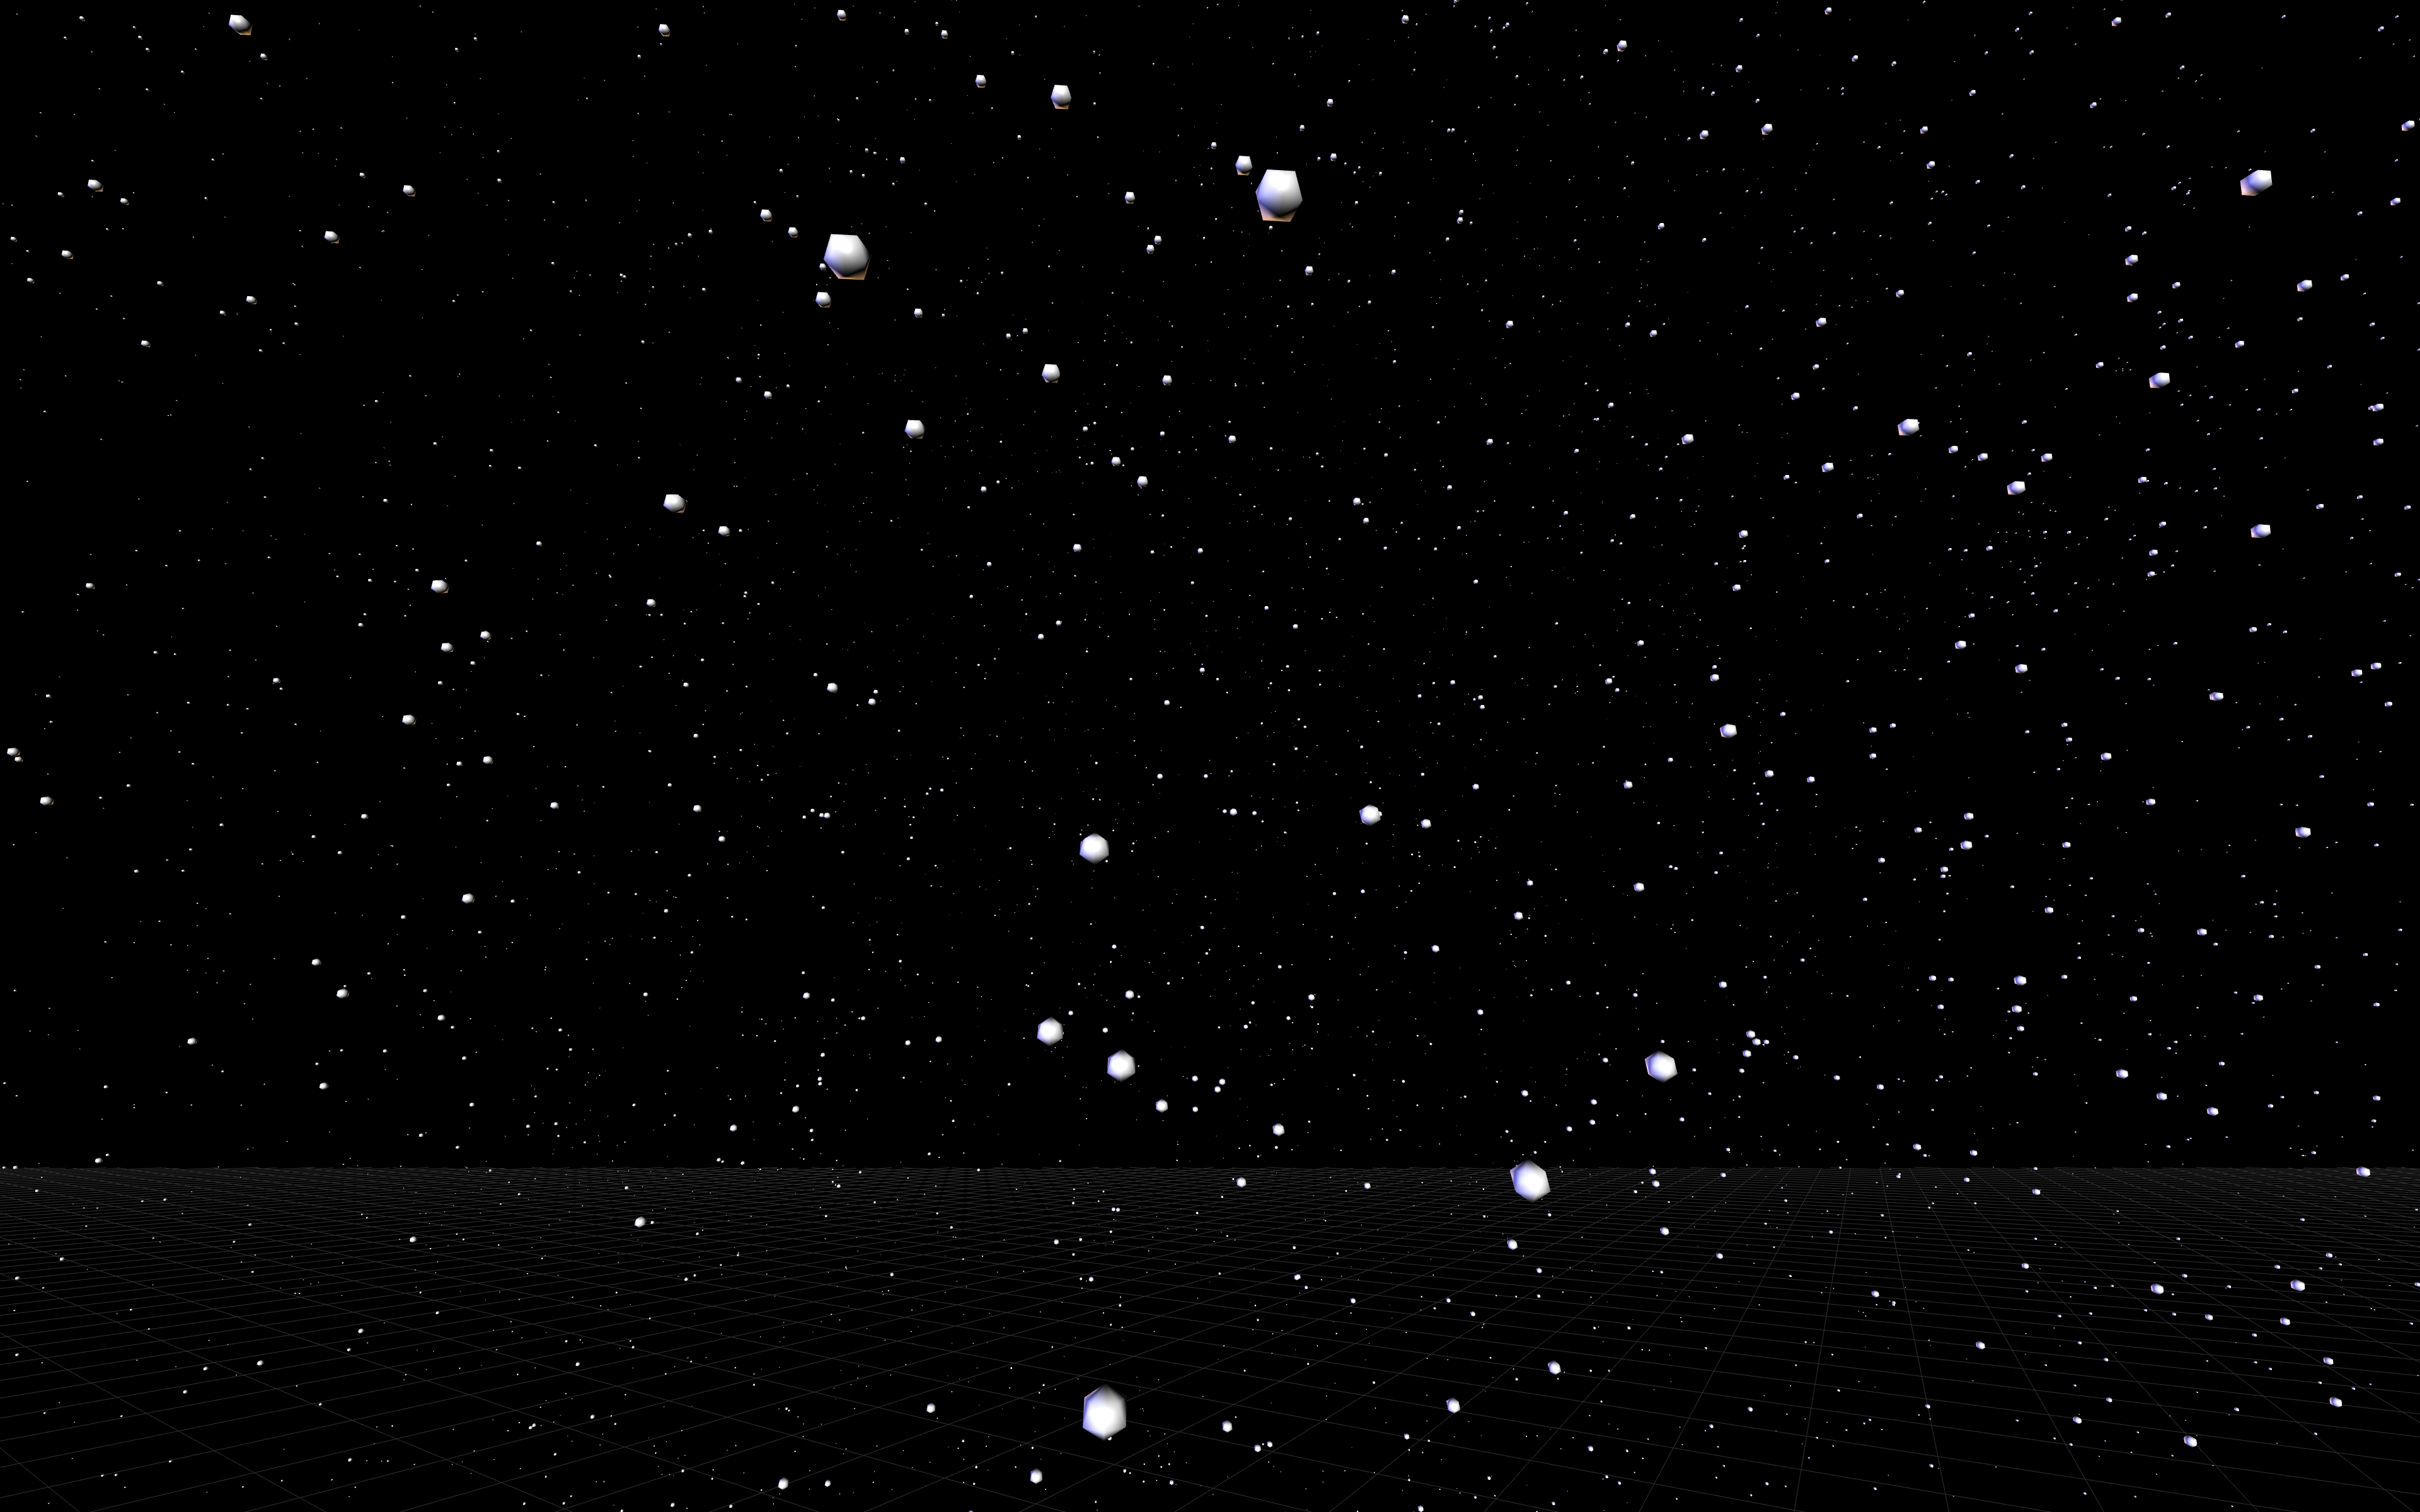 A full immersive view of the closest 35000 stars as seen from Earth, created with VRDeploy and the StarData function.